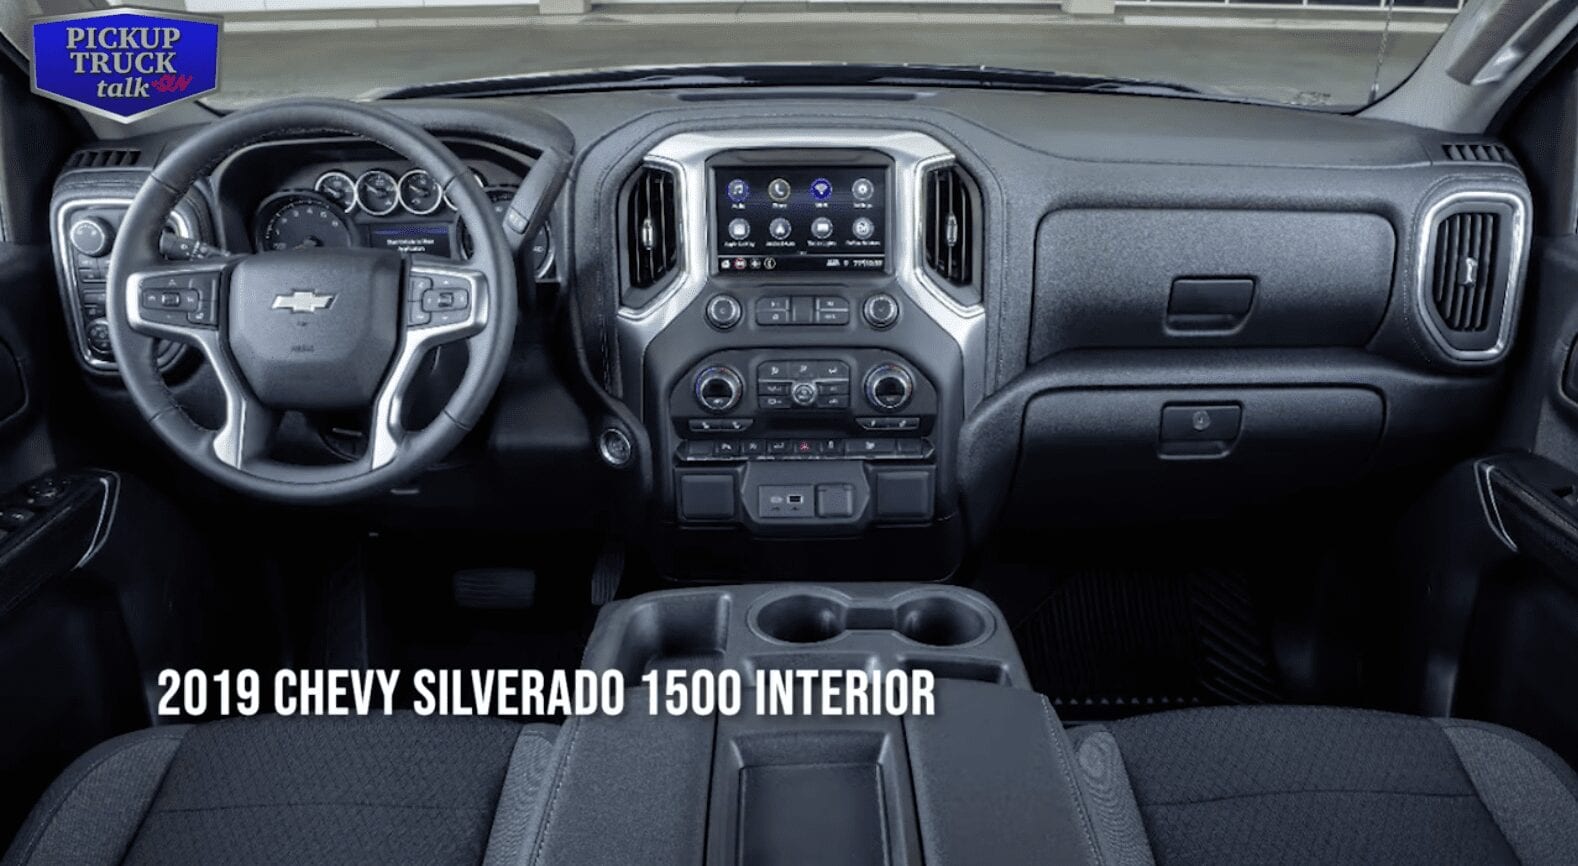 Why we haven't seen a Silverado hybrid + other Chevy questions answered